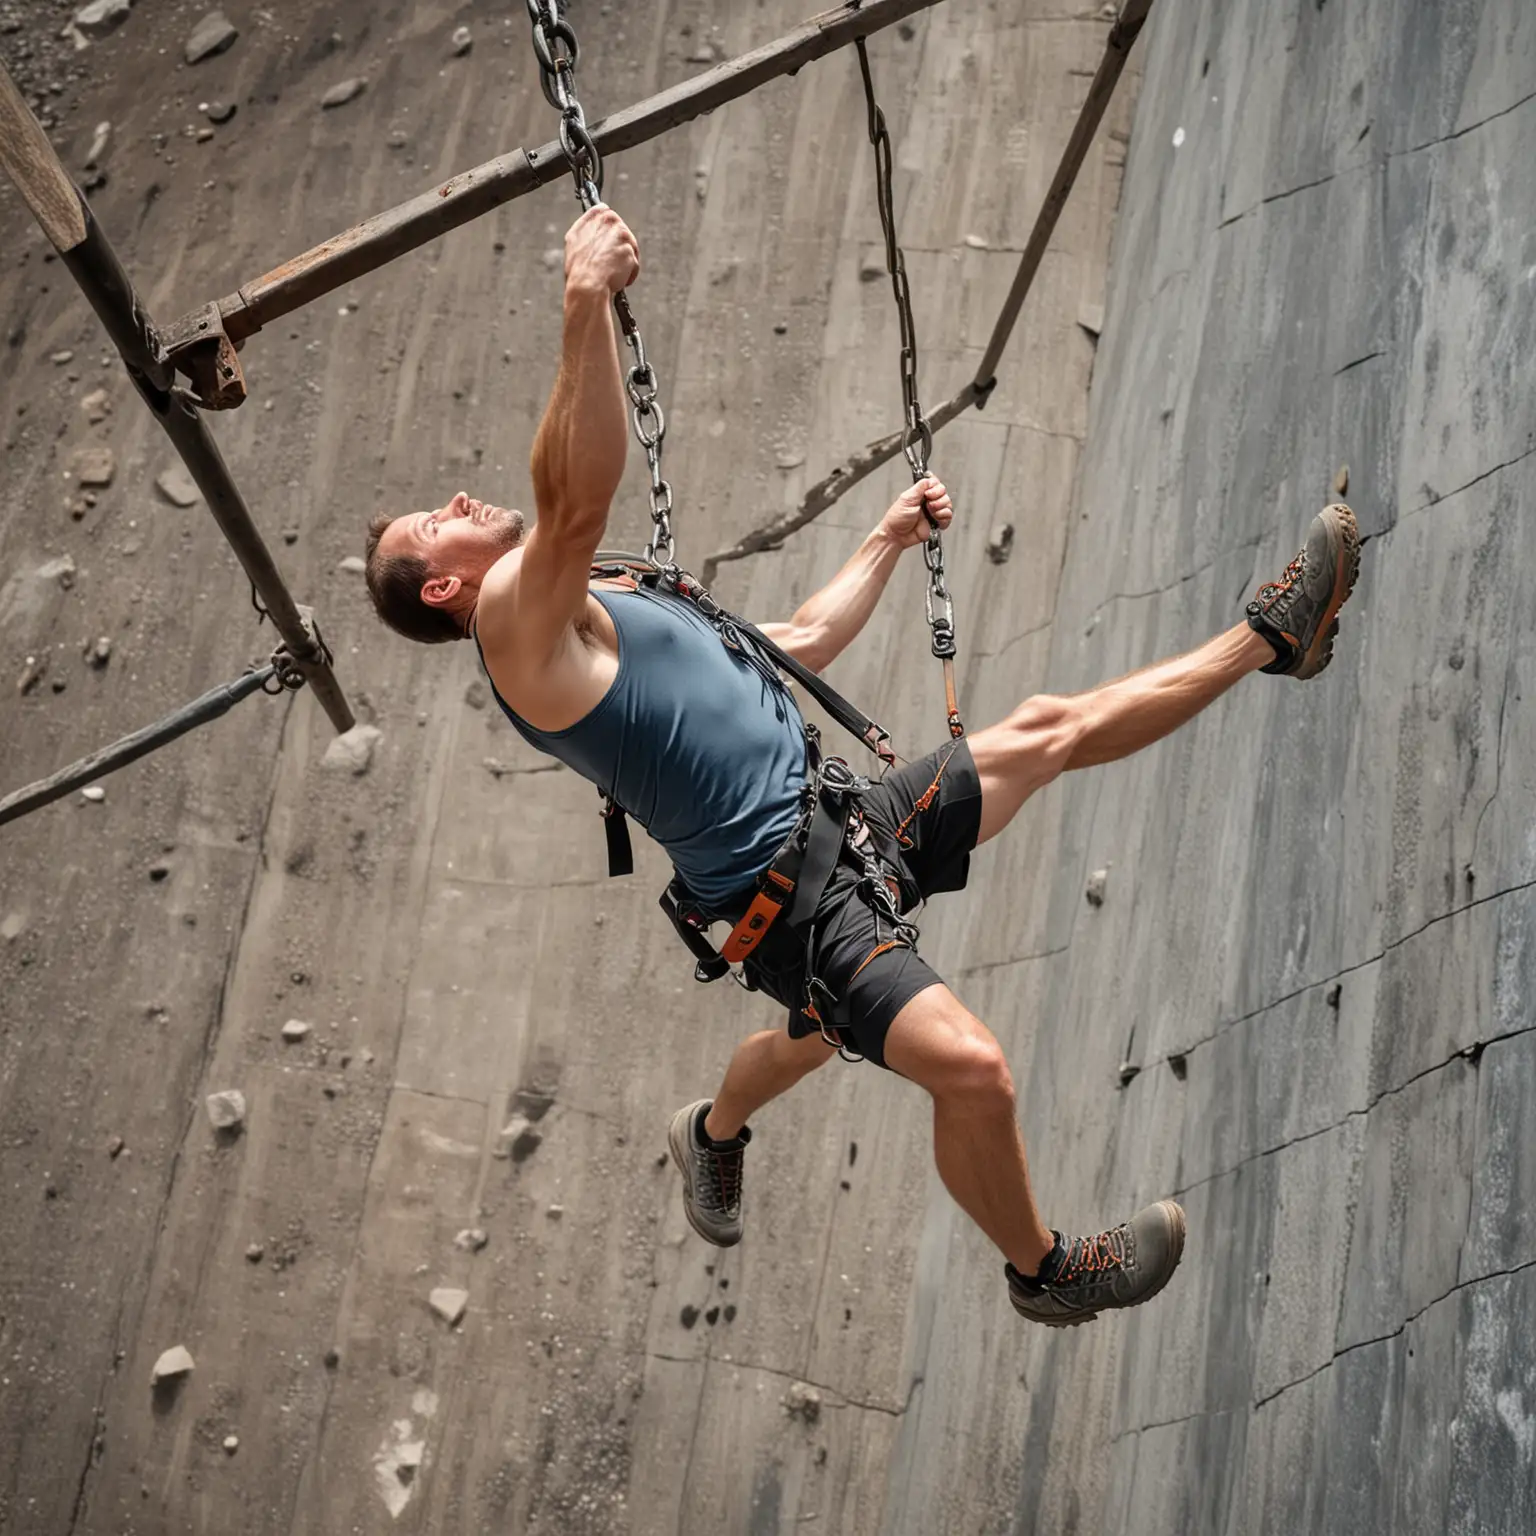 hd photo of climber middle aged short man hanging from metal beam looking down